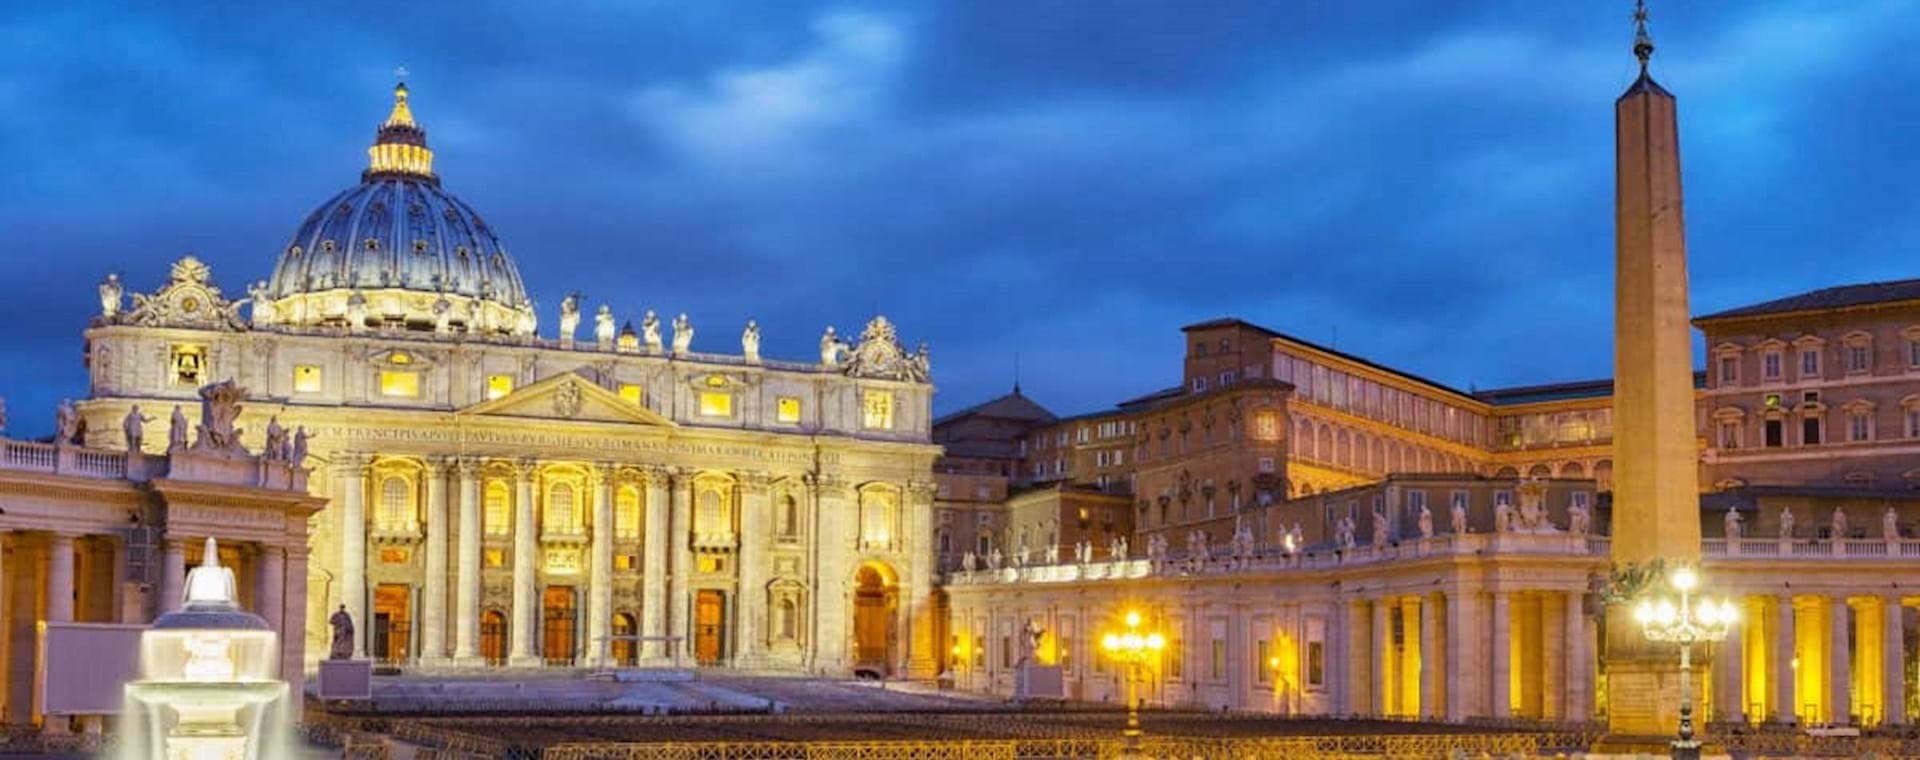 Beautiful view of St Peter Square at night